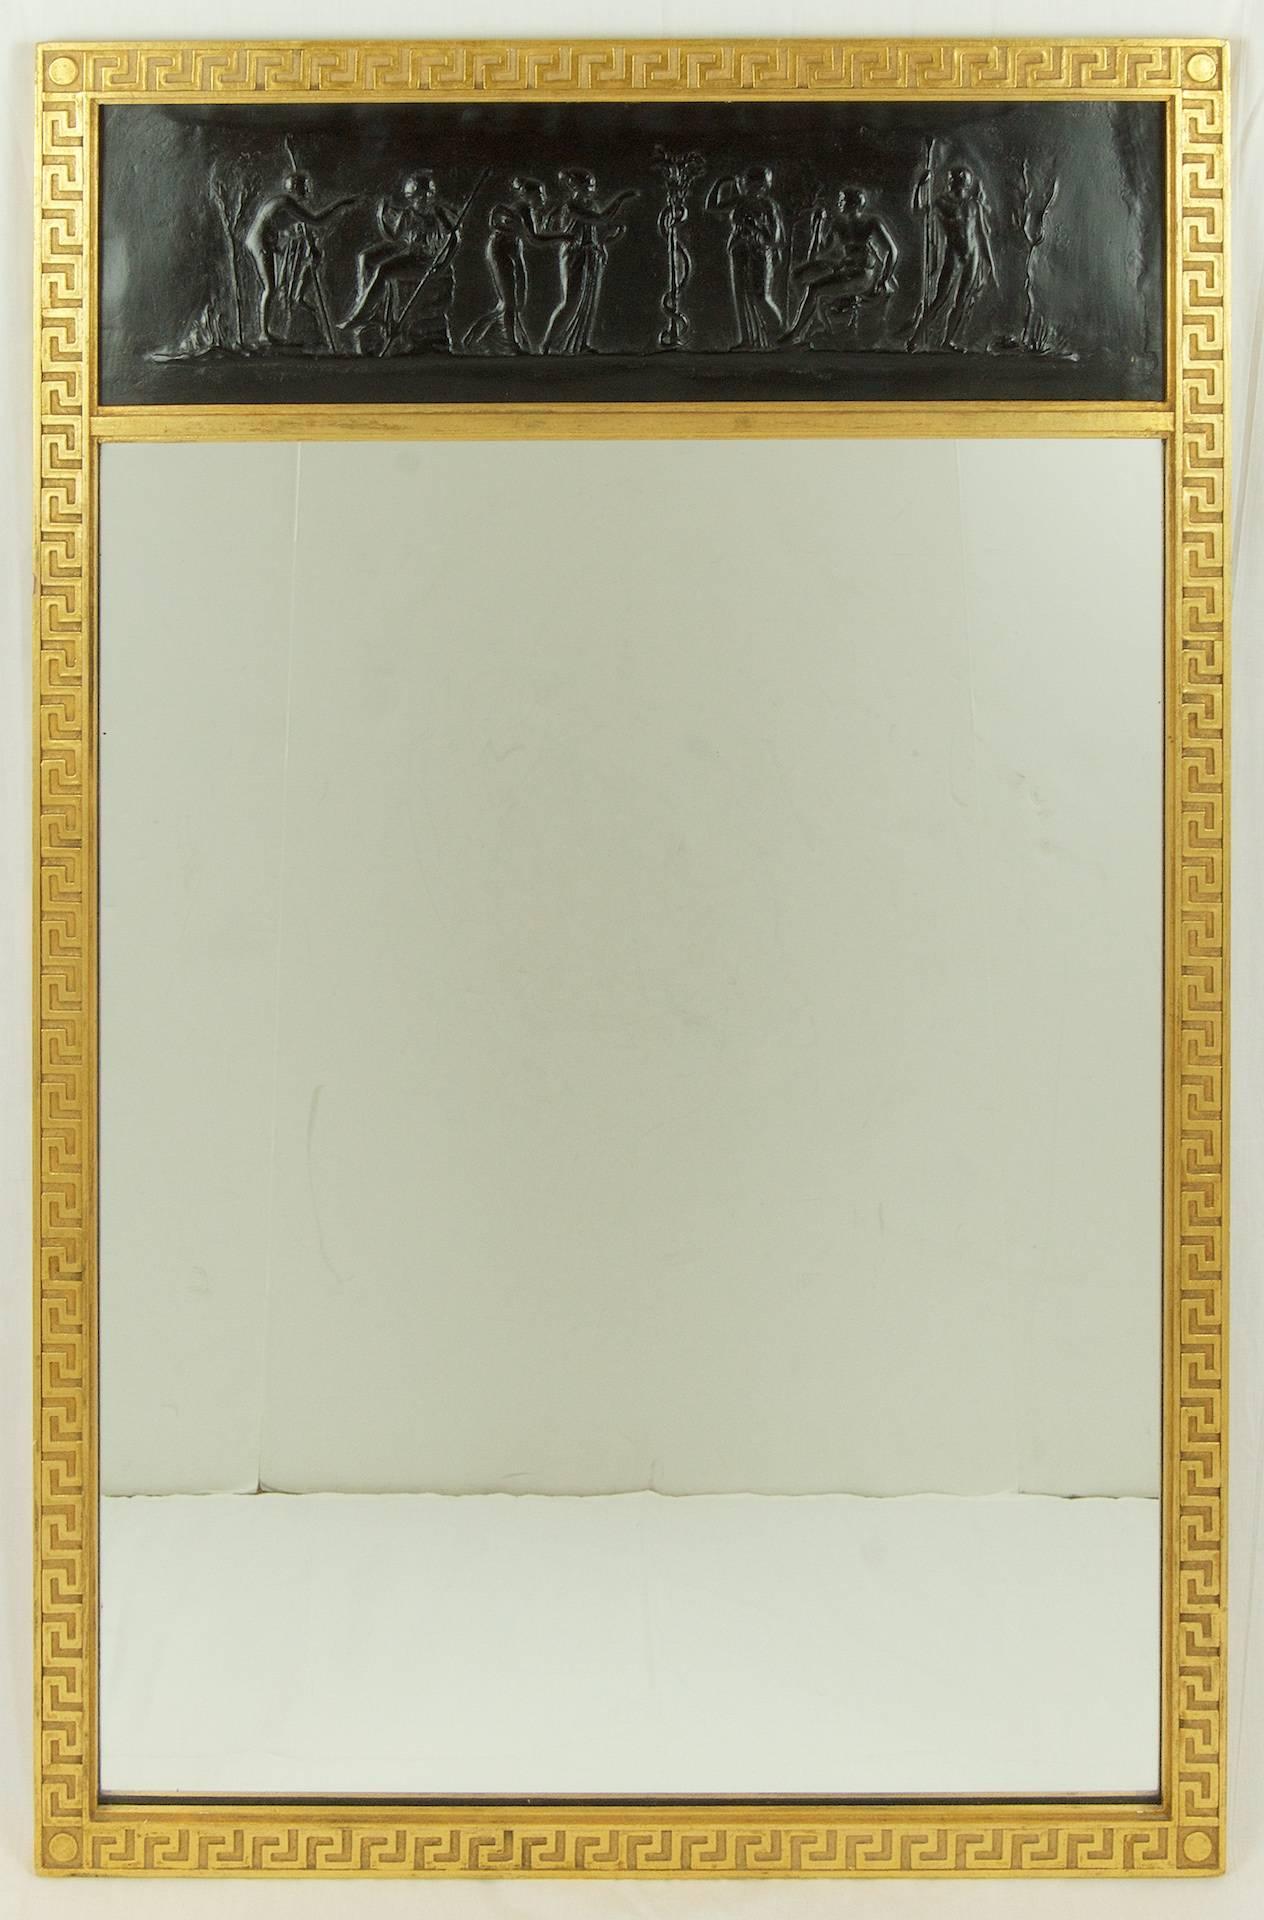 Gold leaf Greek key framed trumeau mirror with faux-basalt bas relief upper vignette

Size of mirror surface is 23.25